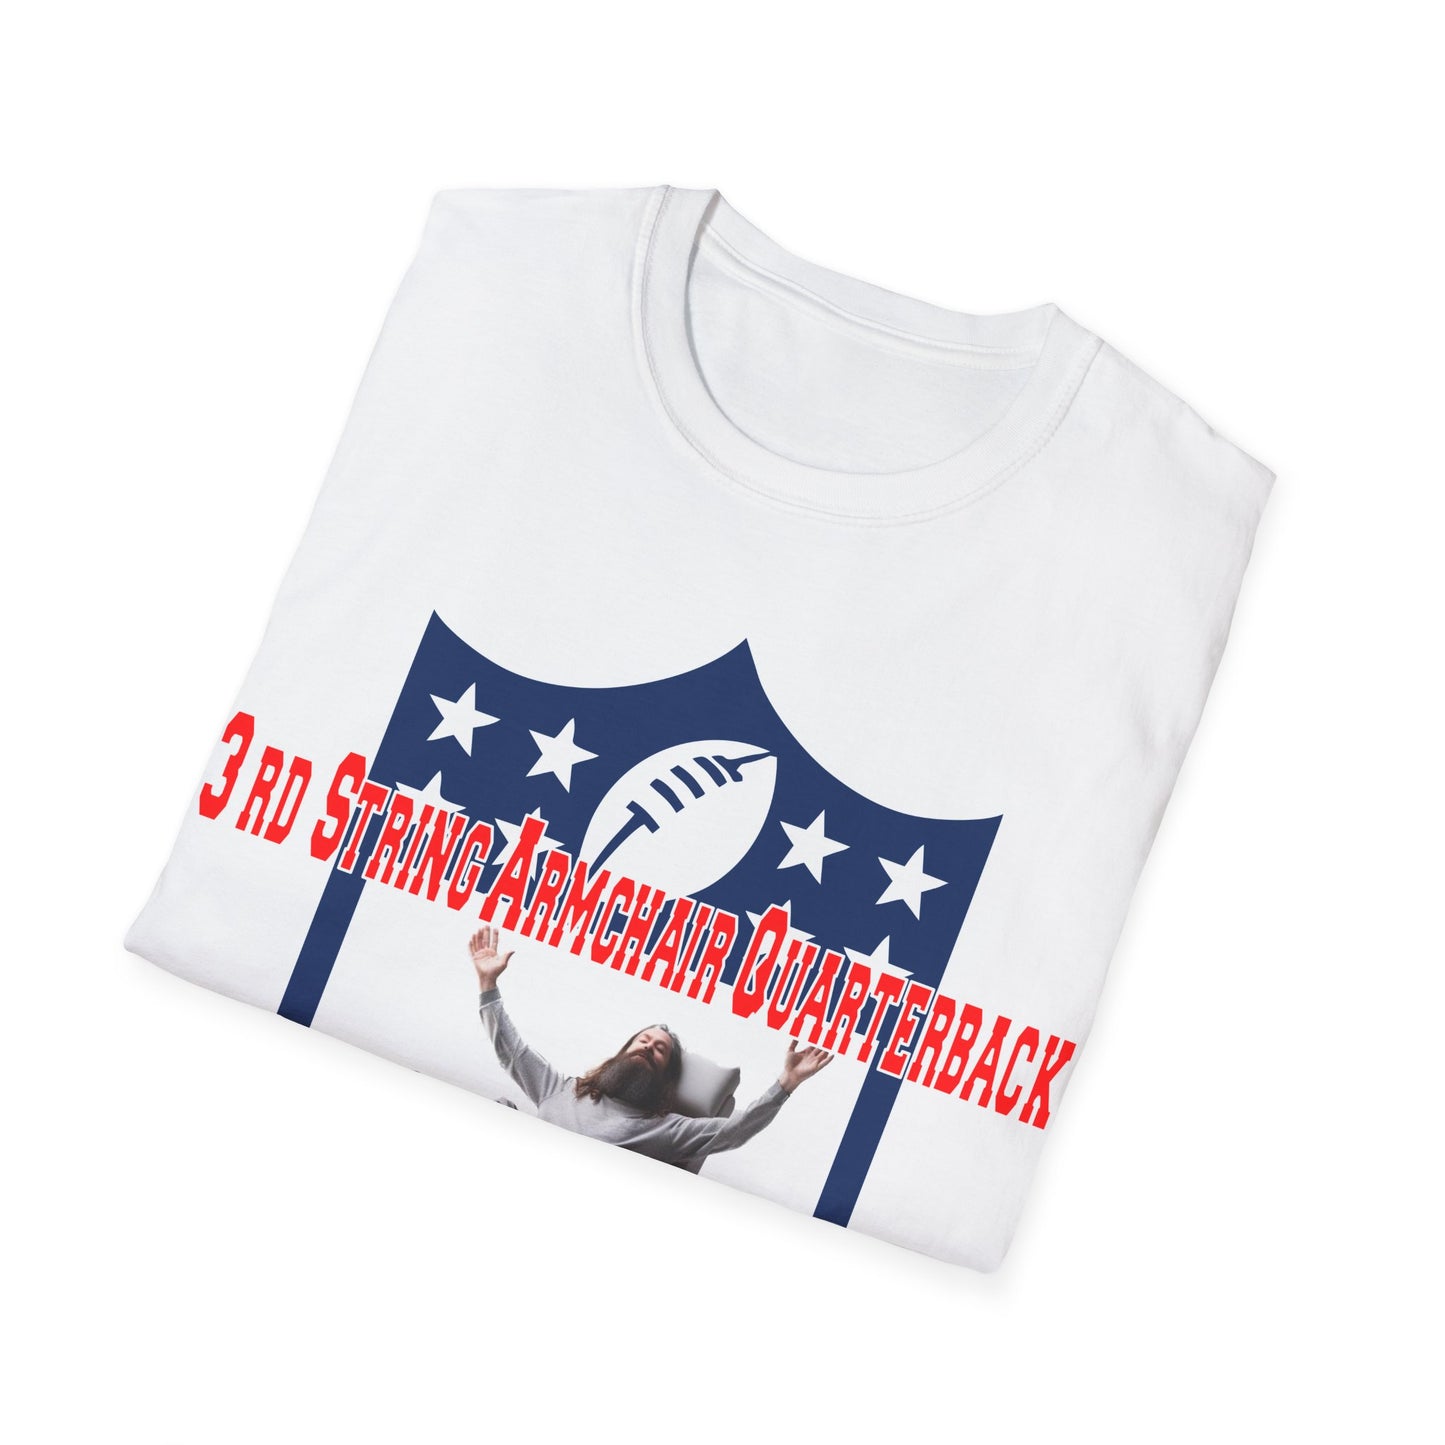 3rd String Armchair Quarterback - Hurts Shirts Collection